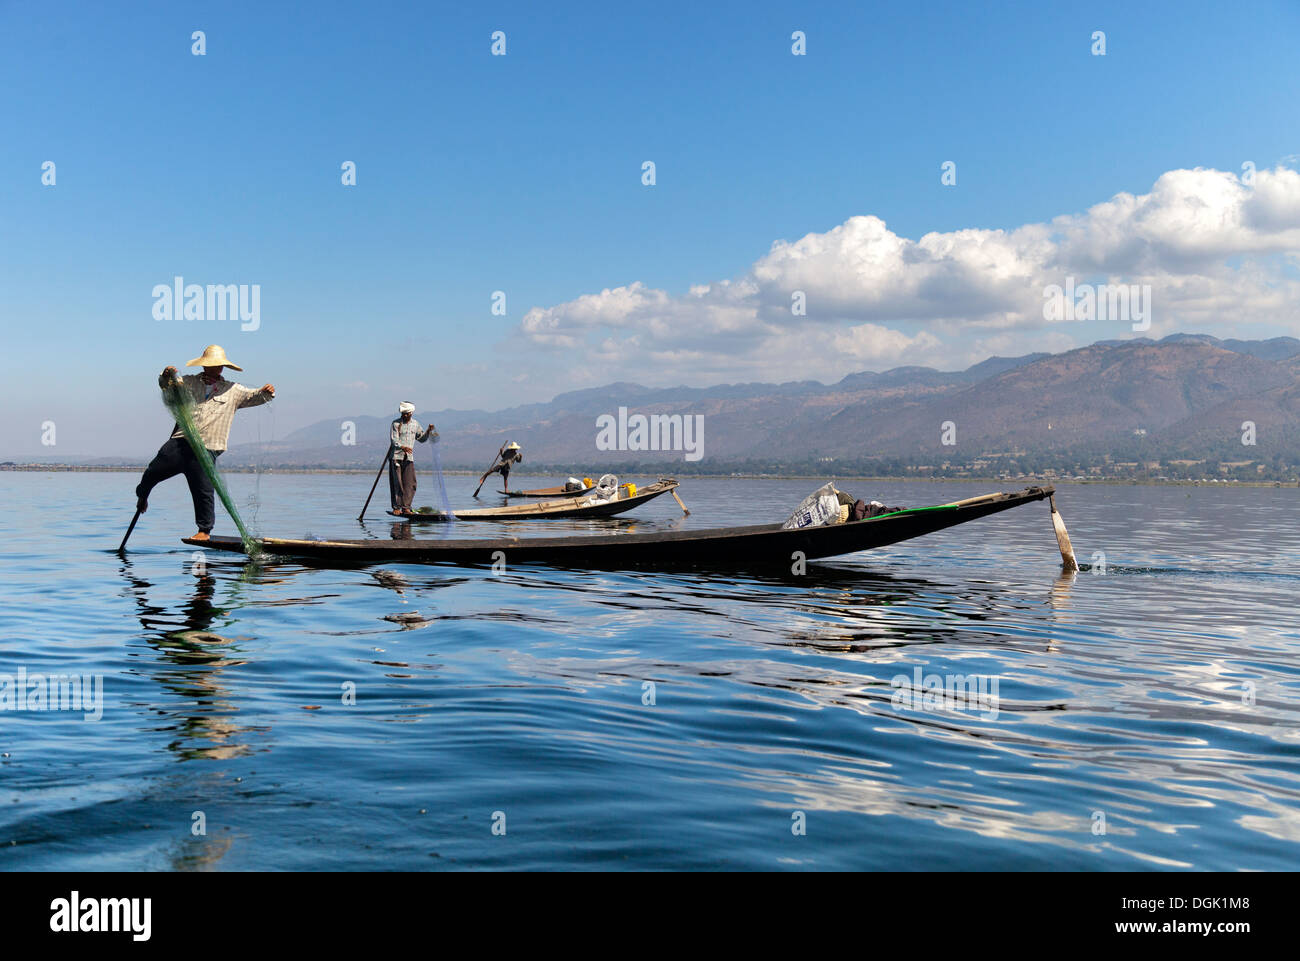 Three fishing boats in a line on Lake Inle in Myanmar. Stock Photo